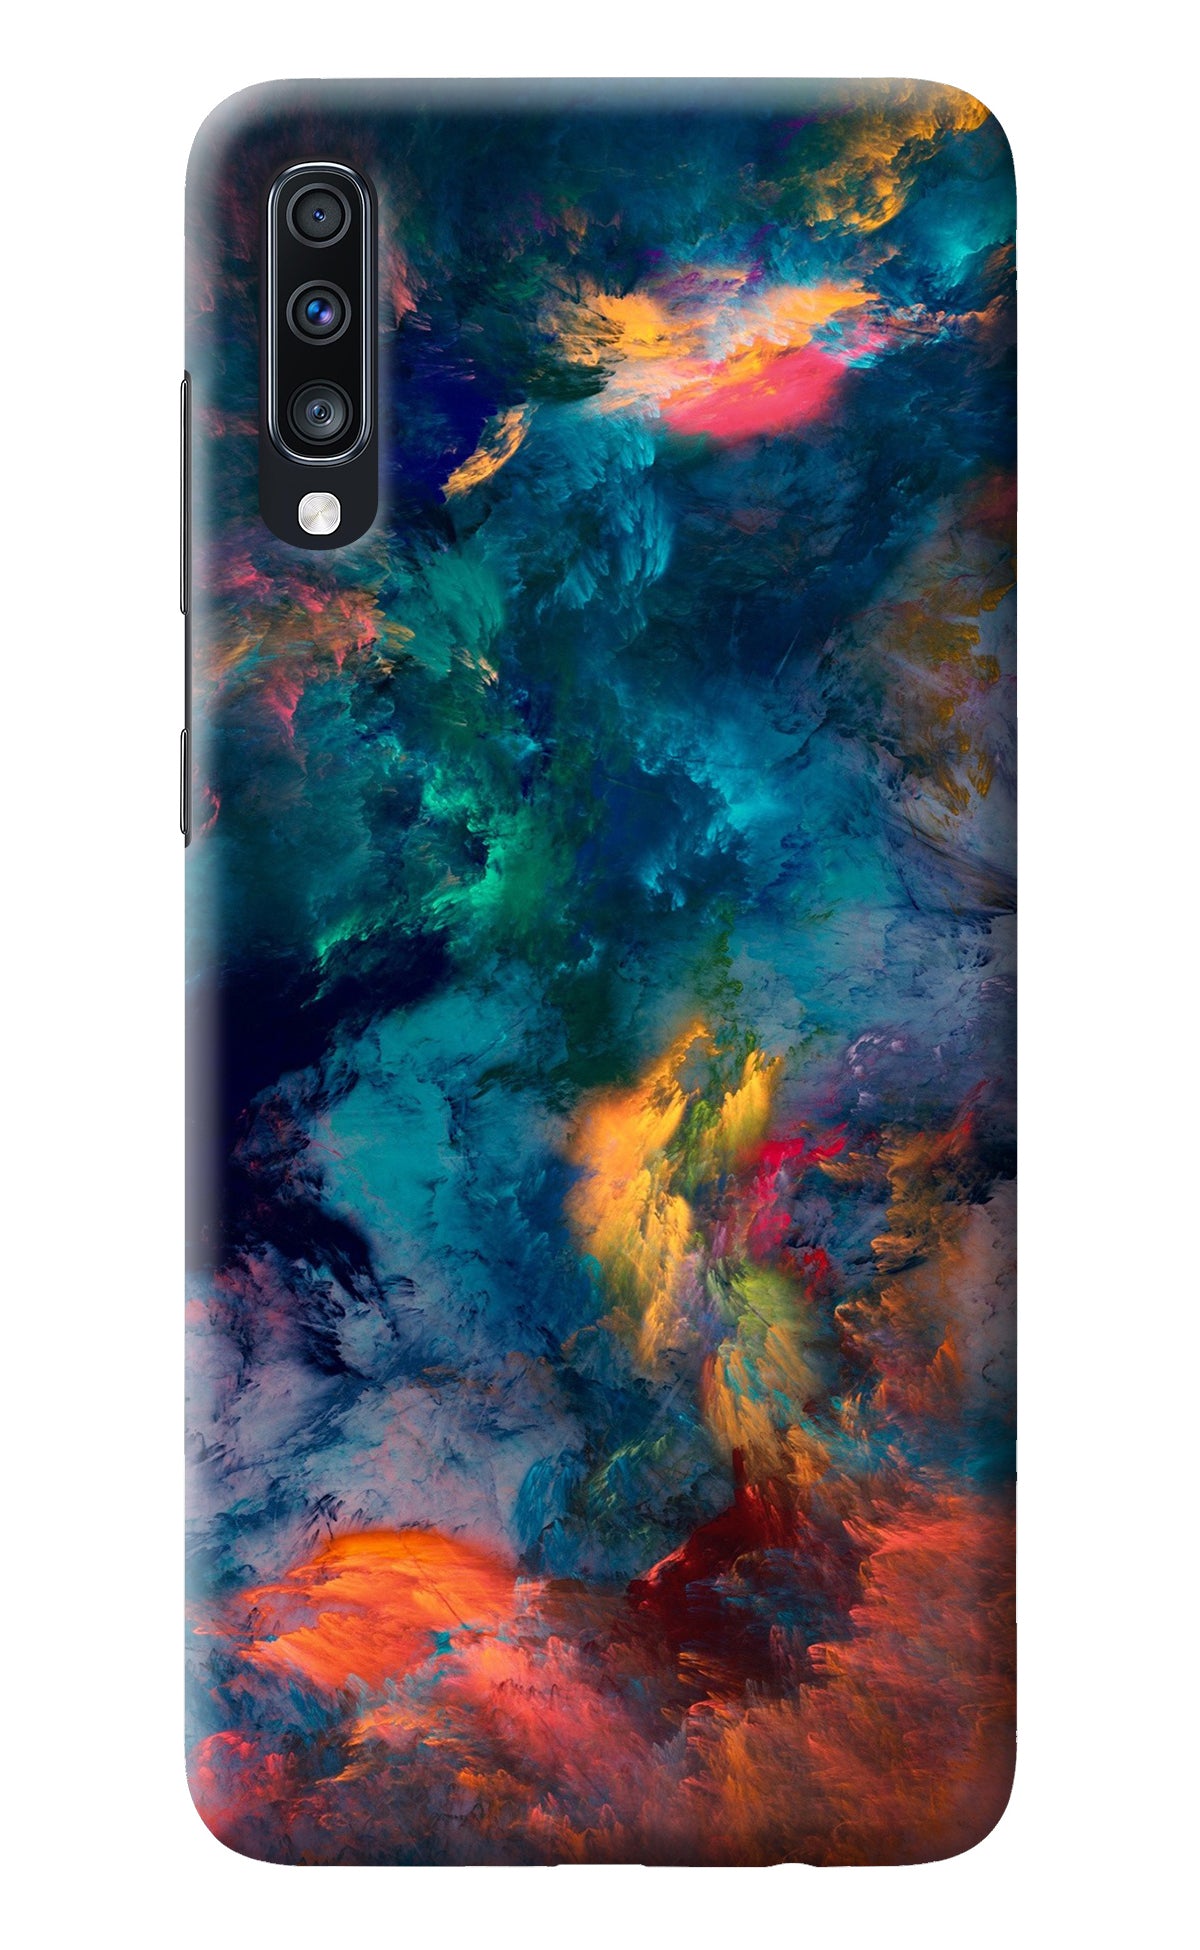 Artwork Paint Samsung A70 Back Cover